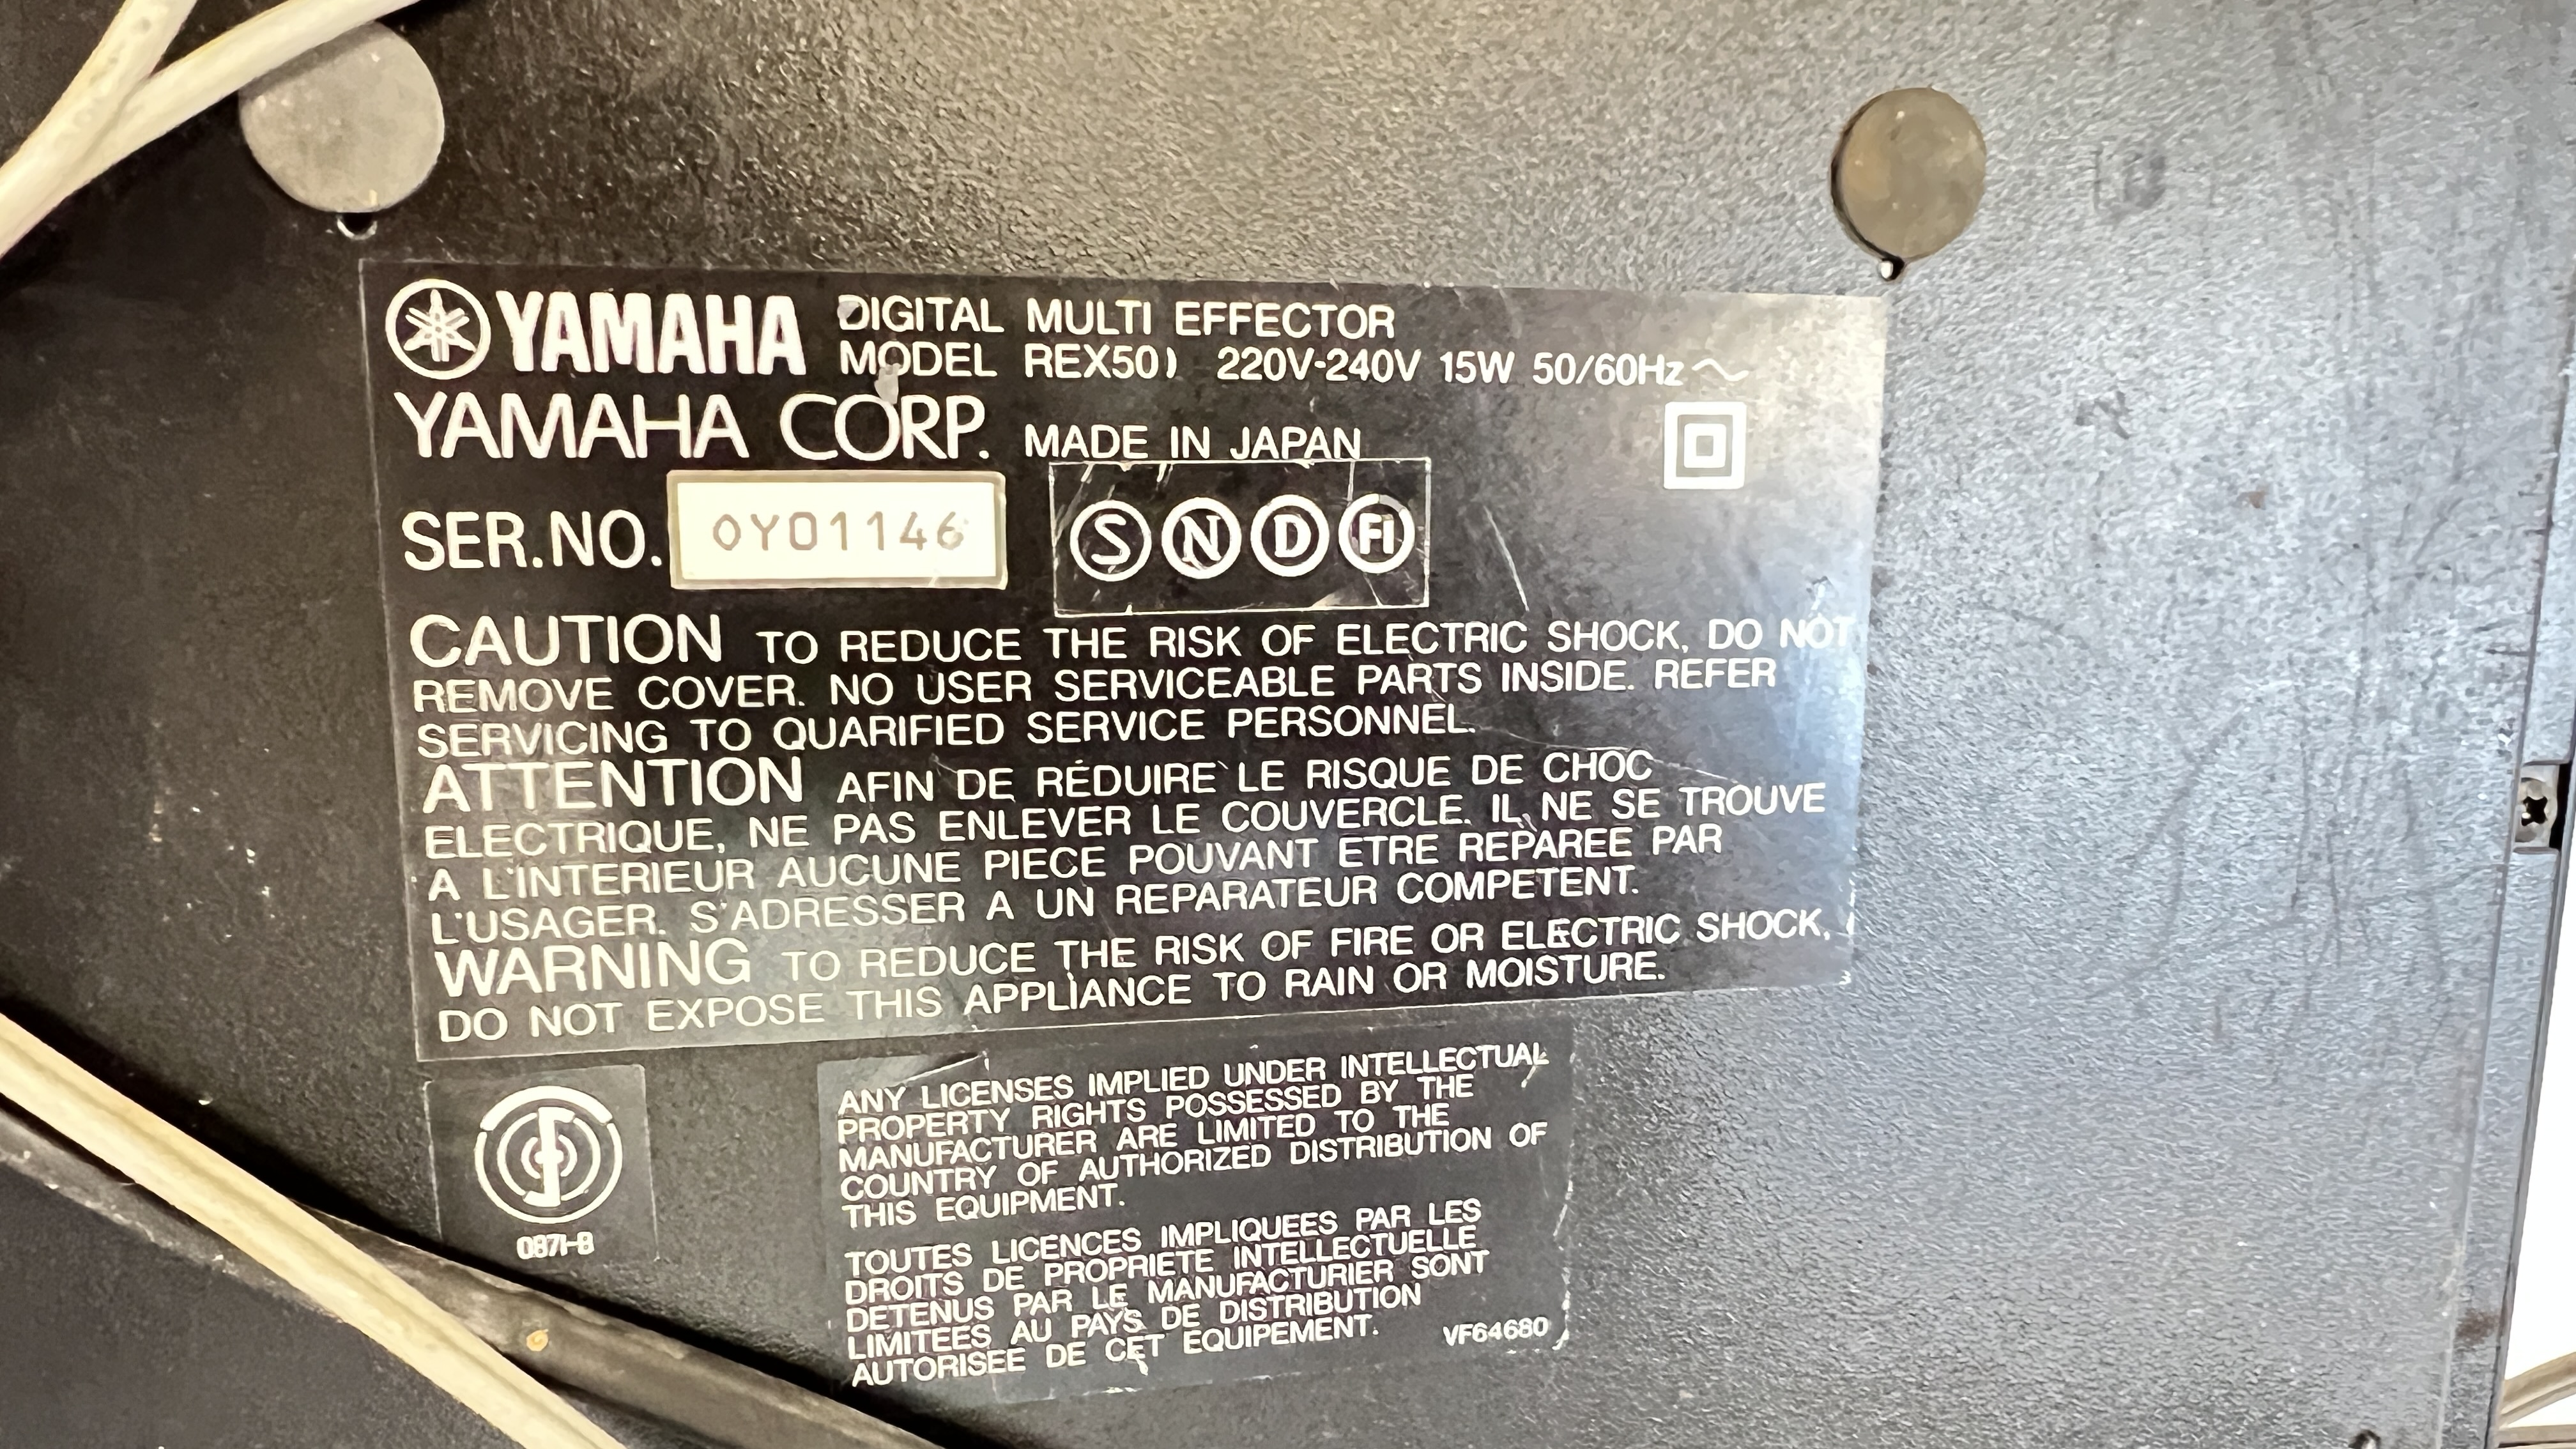 3 X YAMAHA REX50 DIGITAL MULTI EFFECTORS - SOLD AS SEEN - AS CLEARED. - Image 6 of 6